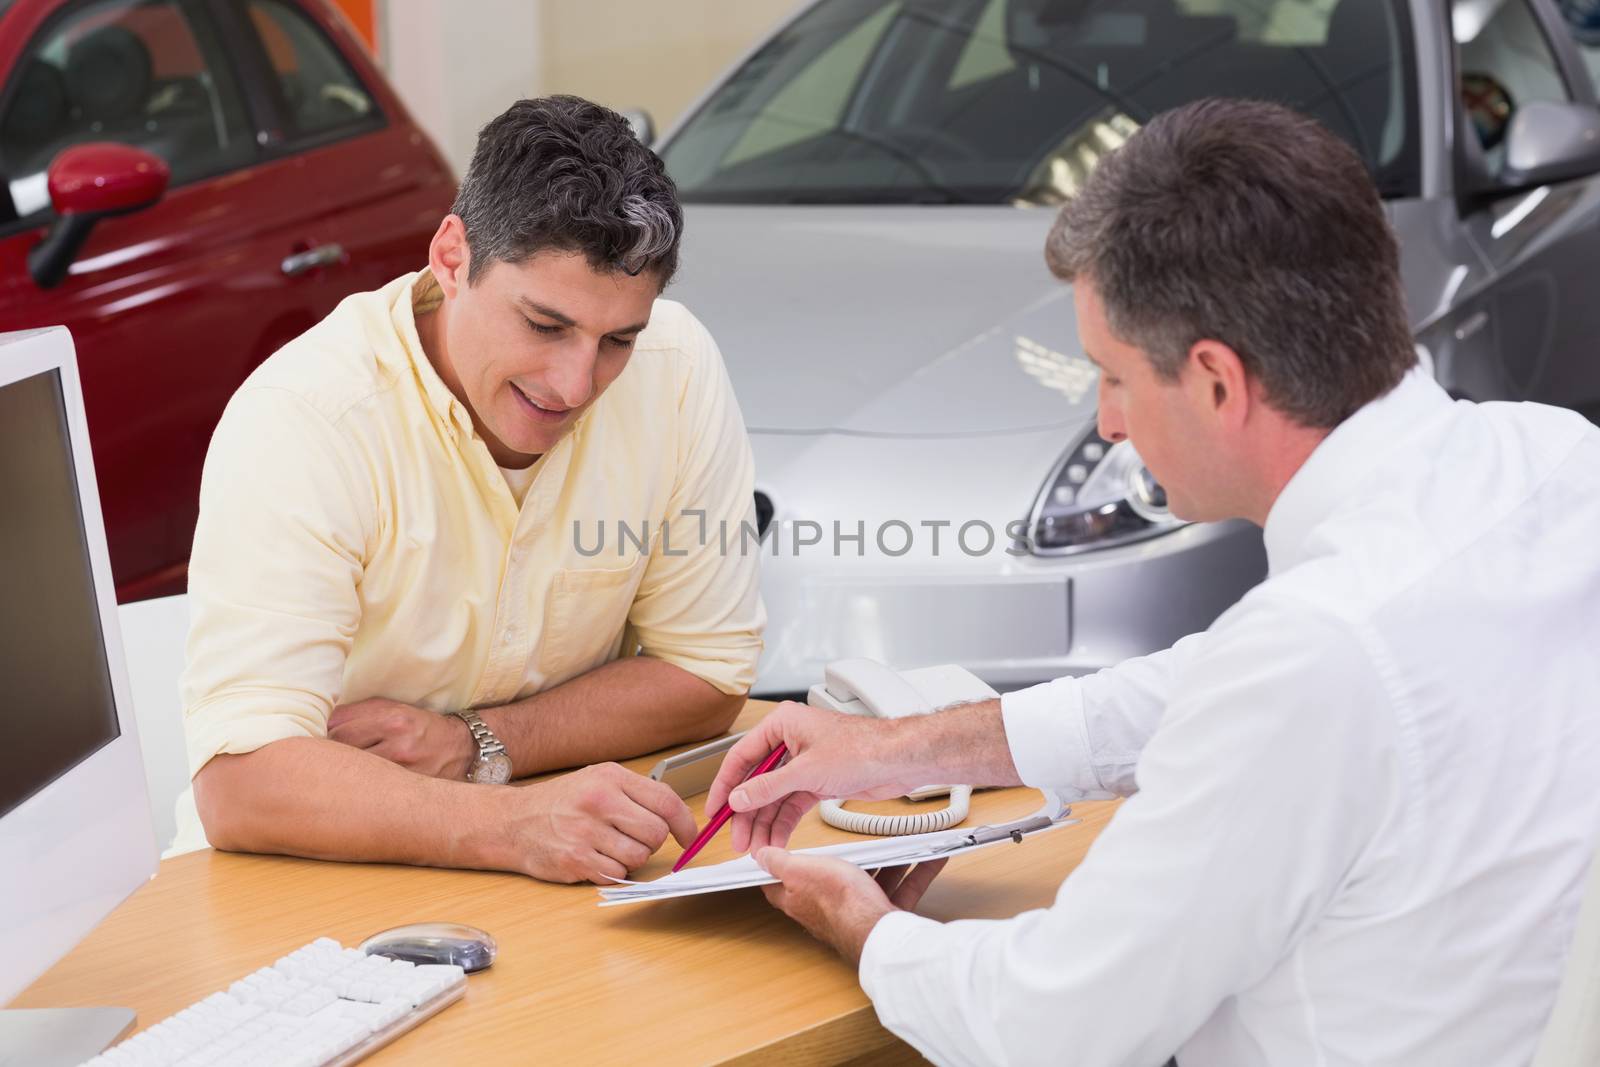 Salesman showing client where to sign the deal by Wavebreakmedia